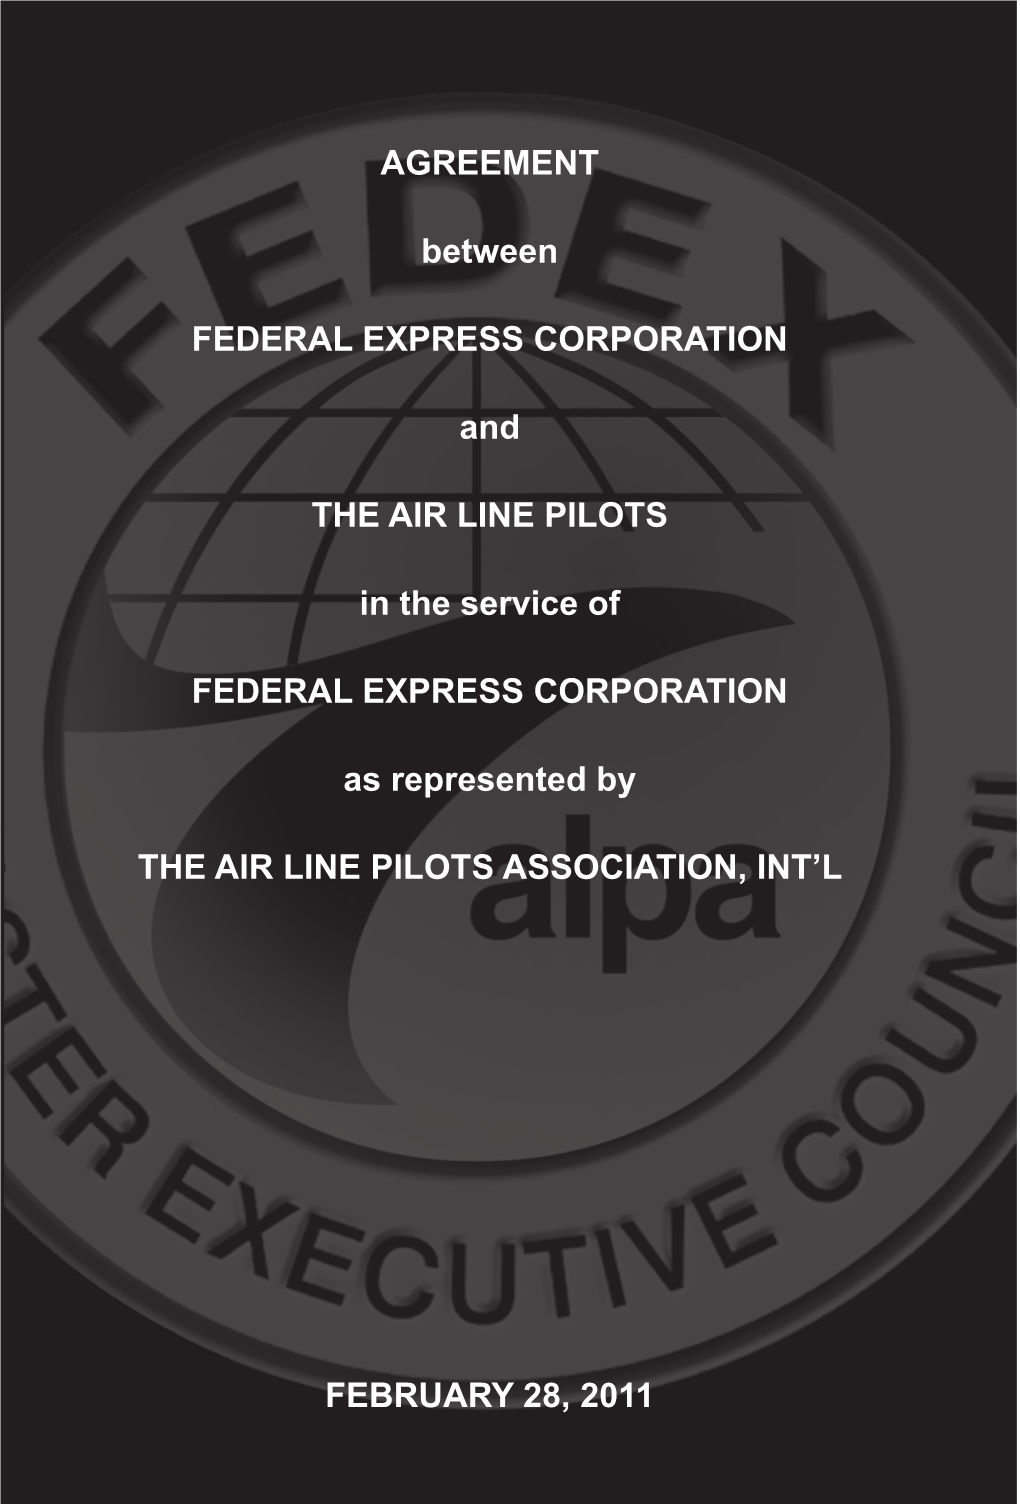 Agreement Between Federal Express Corporation and the Association, Whichever Occurs Sooner